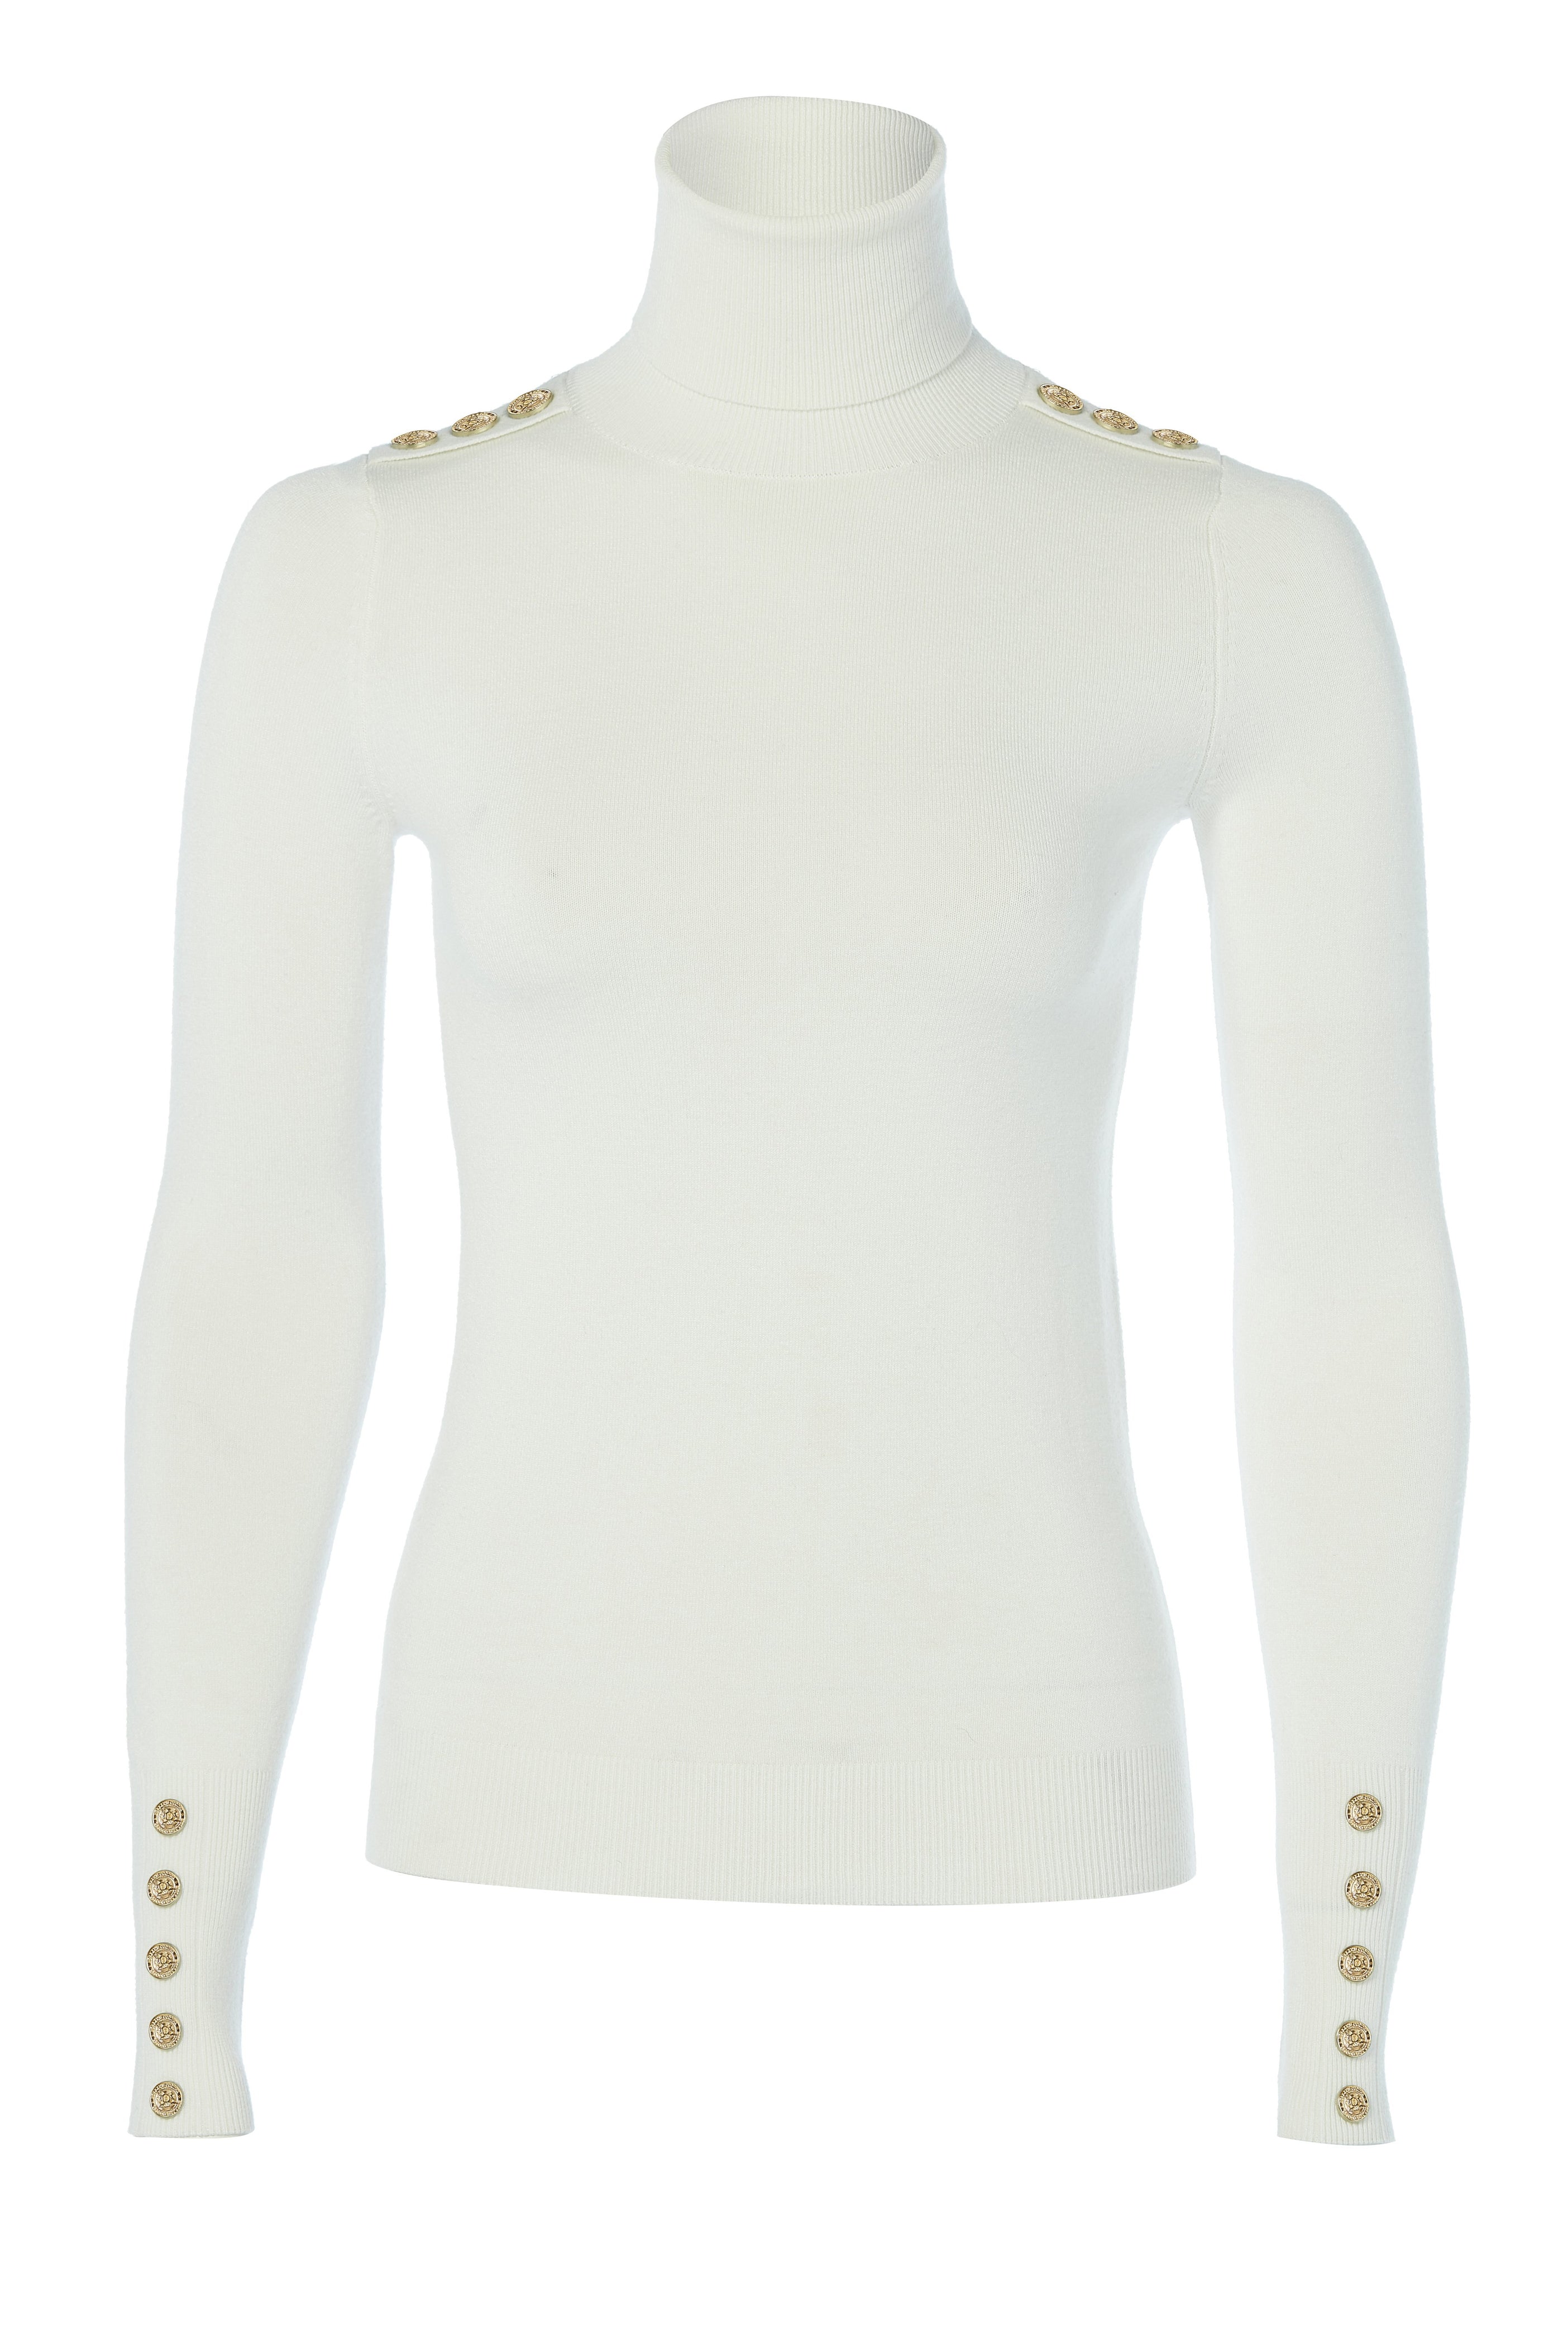 Buttoned Knit Roll Neck (Cream) – Holland Cooper